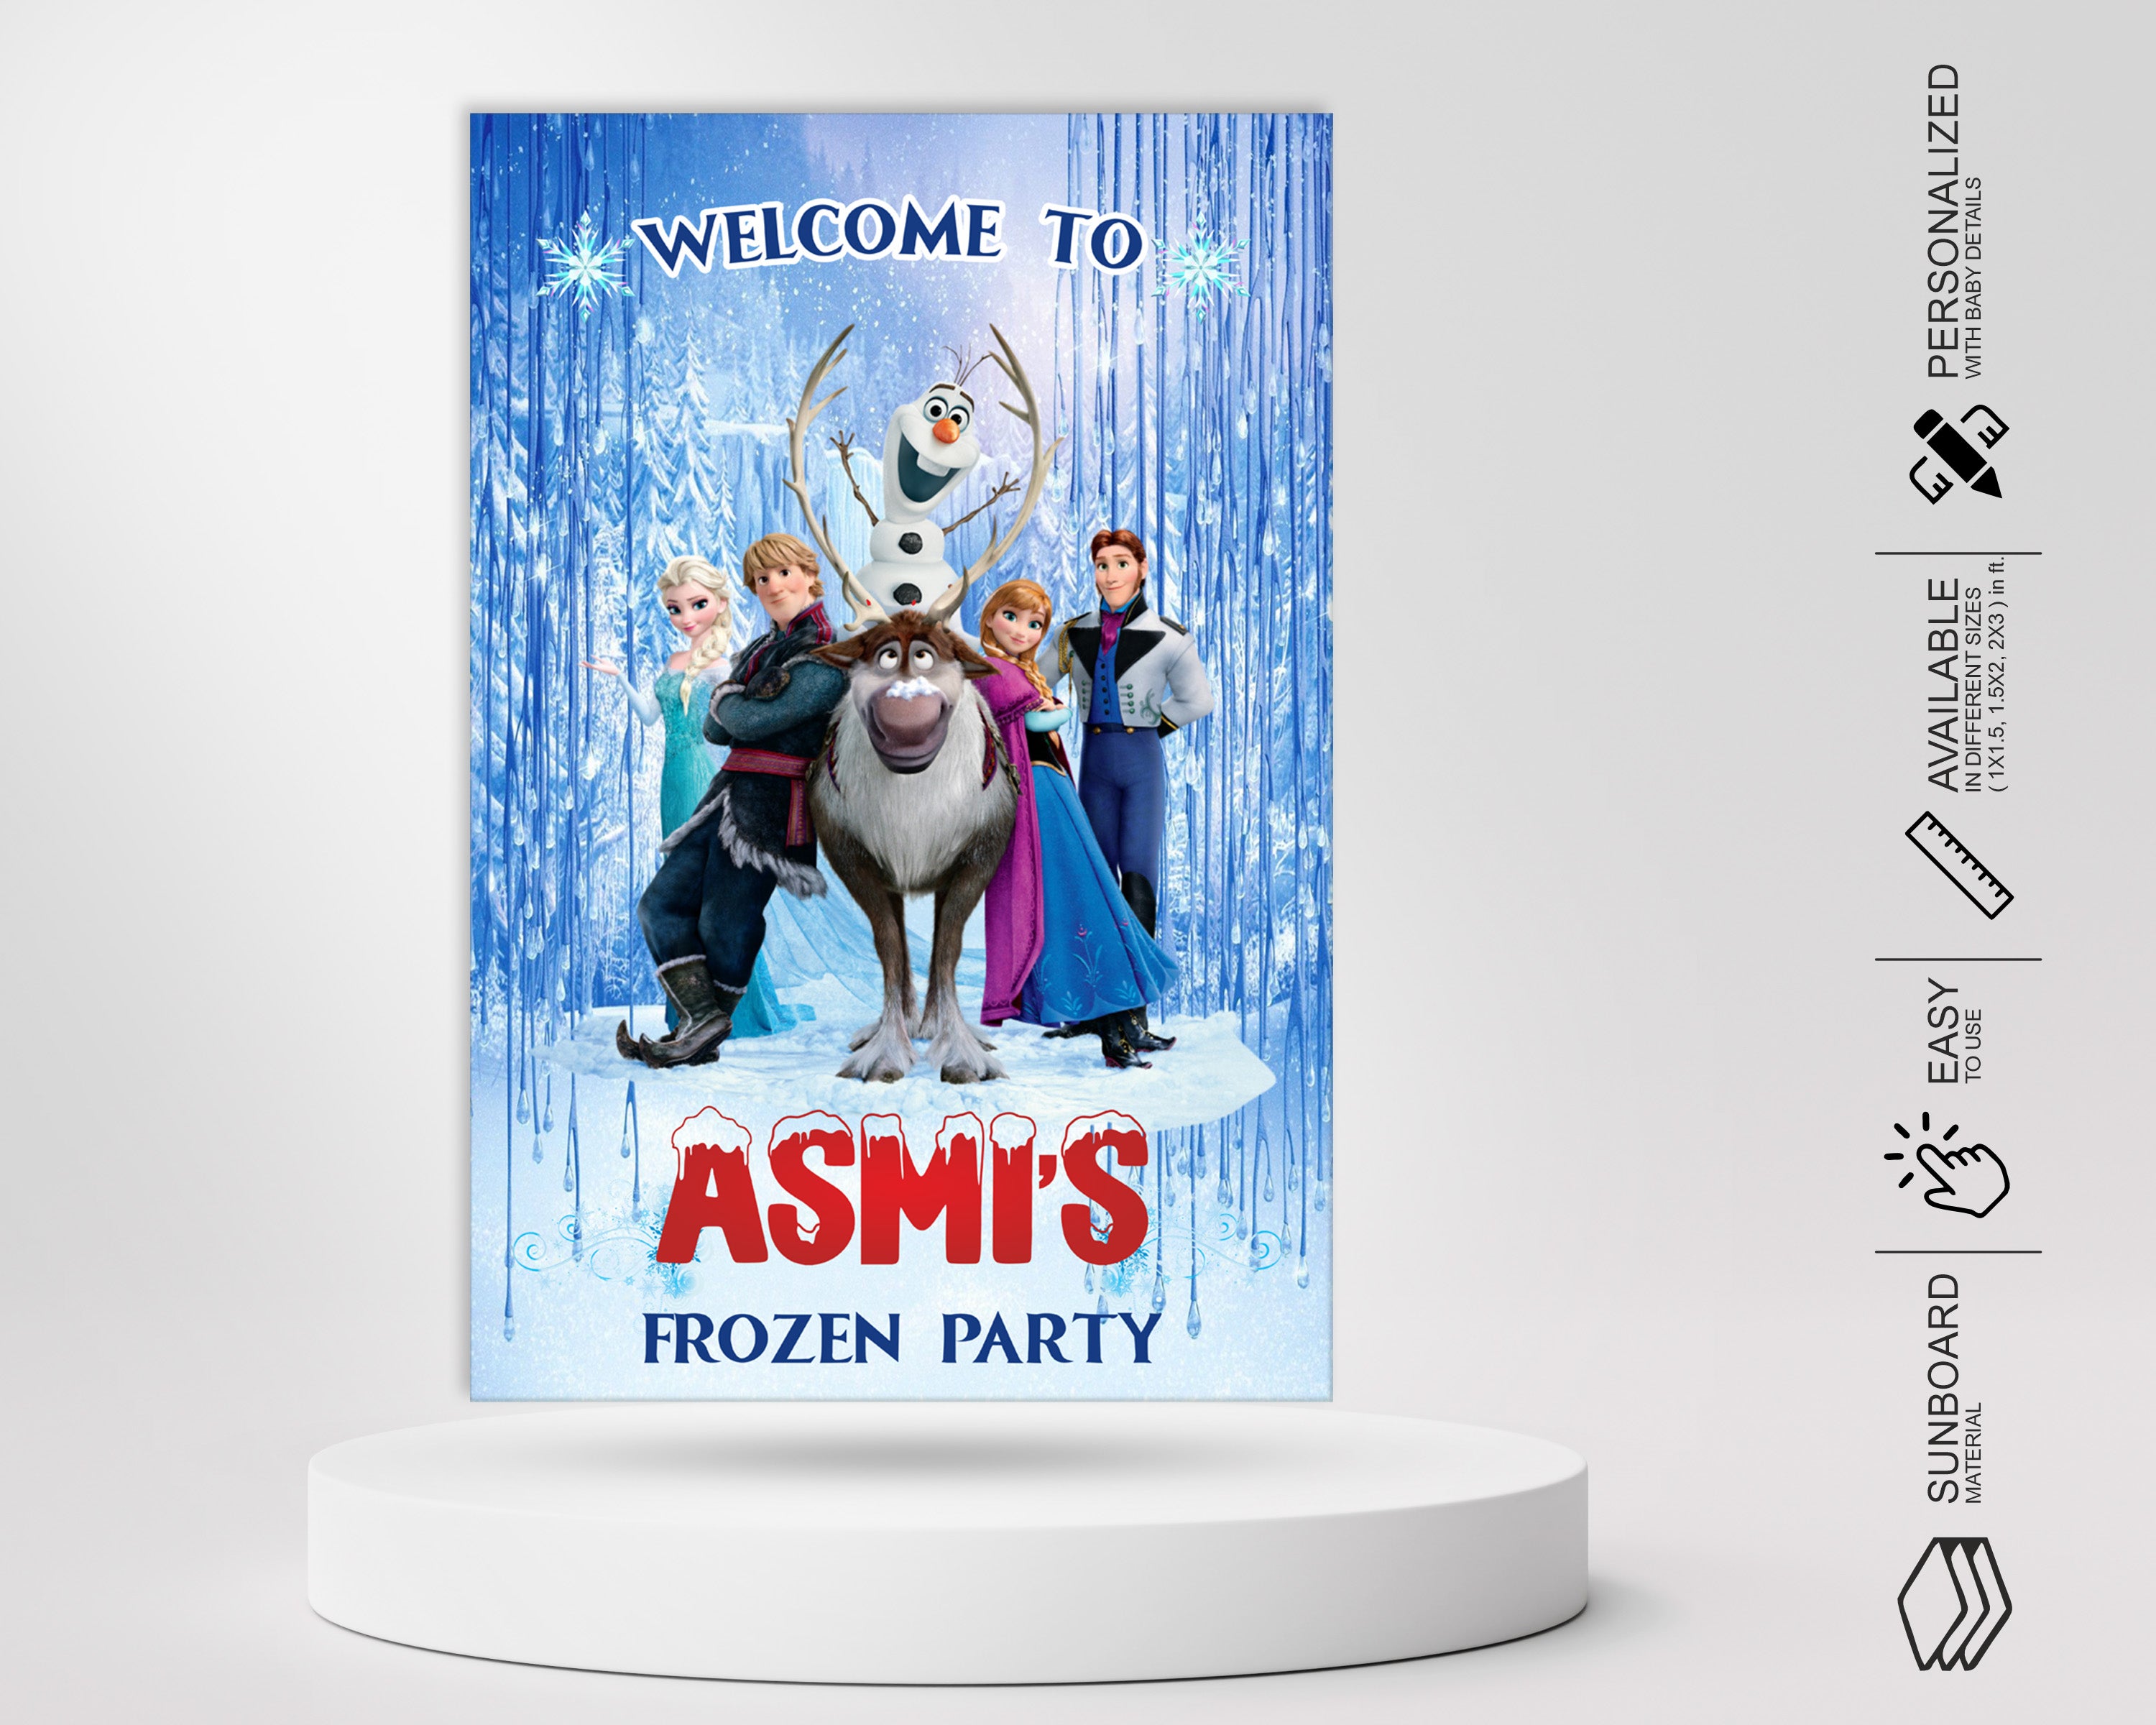 PSI Frozen Theme Customized Welcome Board